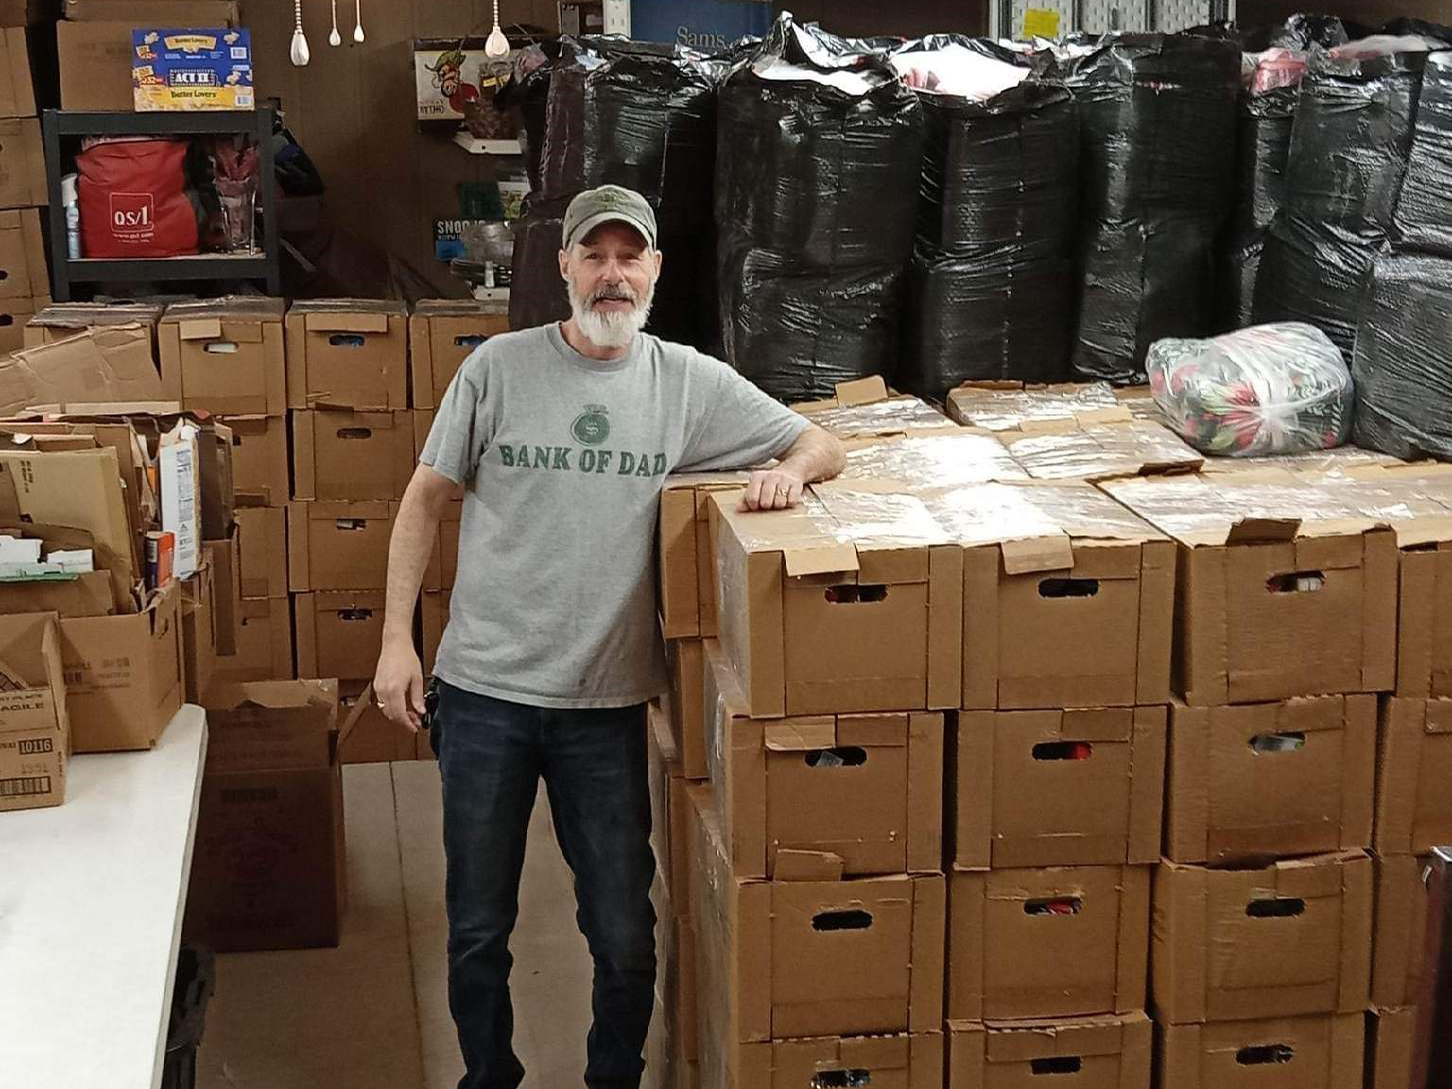 Packs for Hunger volunteer standing with the boxes of food